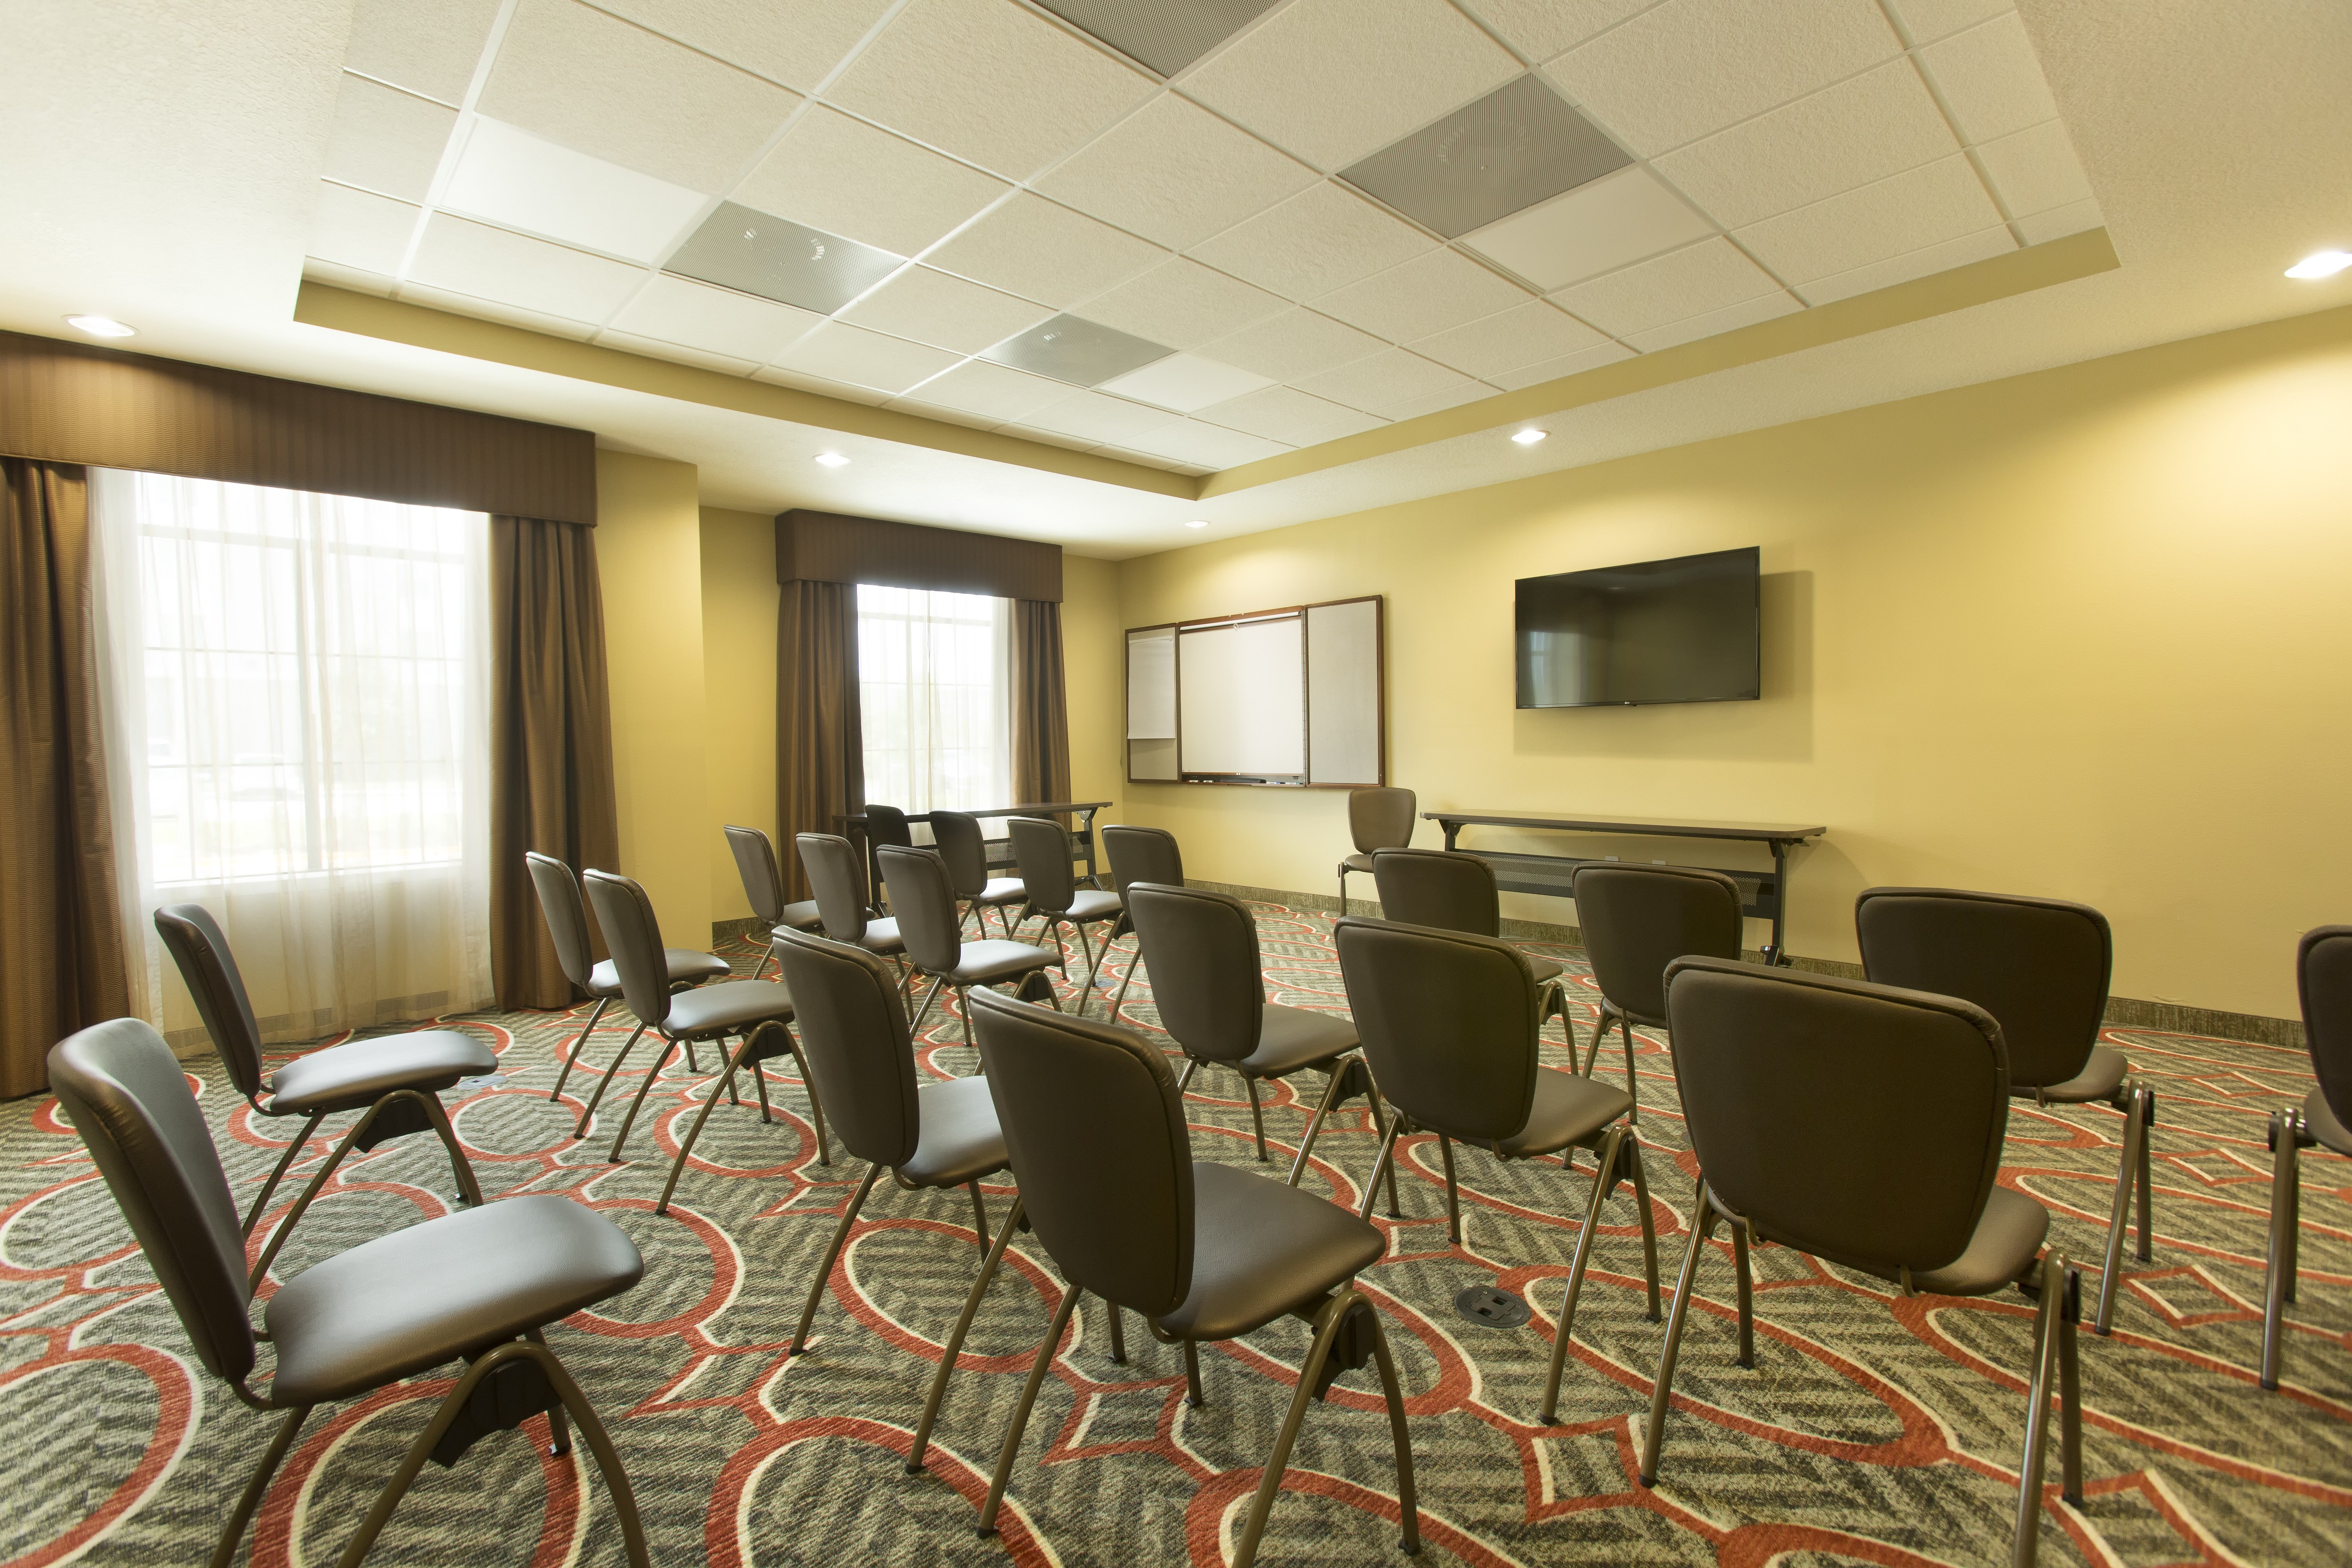 Meetings are easy when you leave the details to us.